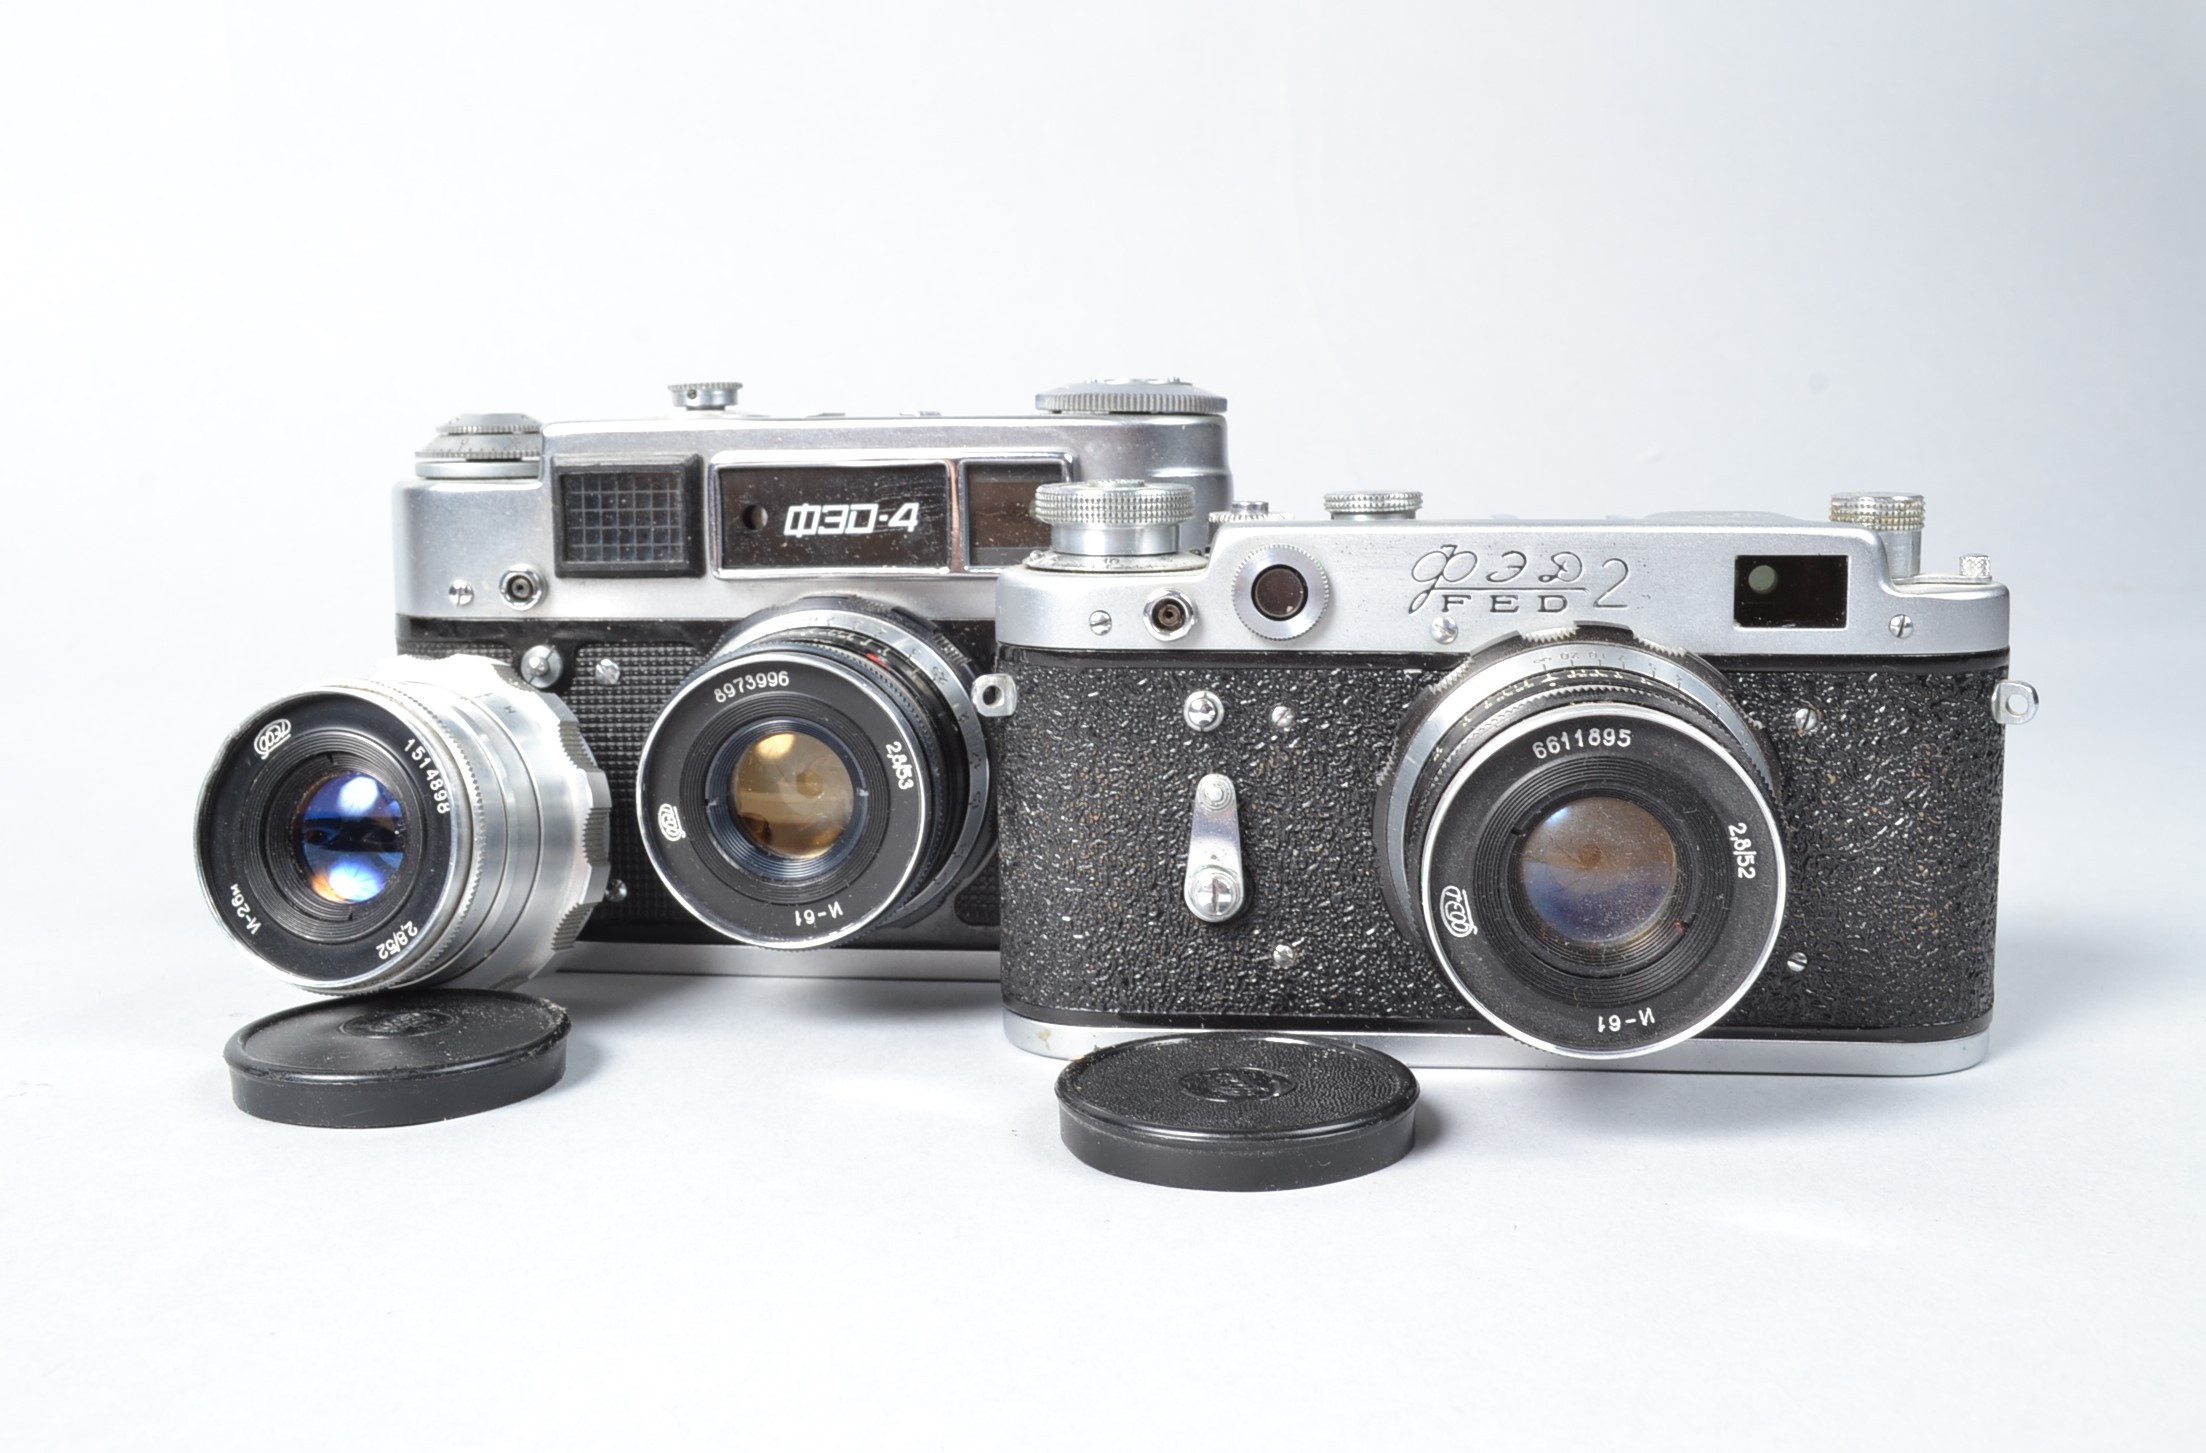 Two FED Cameras, a FED 2, with N-61 52mm f/2.8 lens and a FED 4, with N-61 53mm f/2.8 lens and a Fed